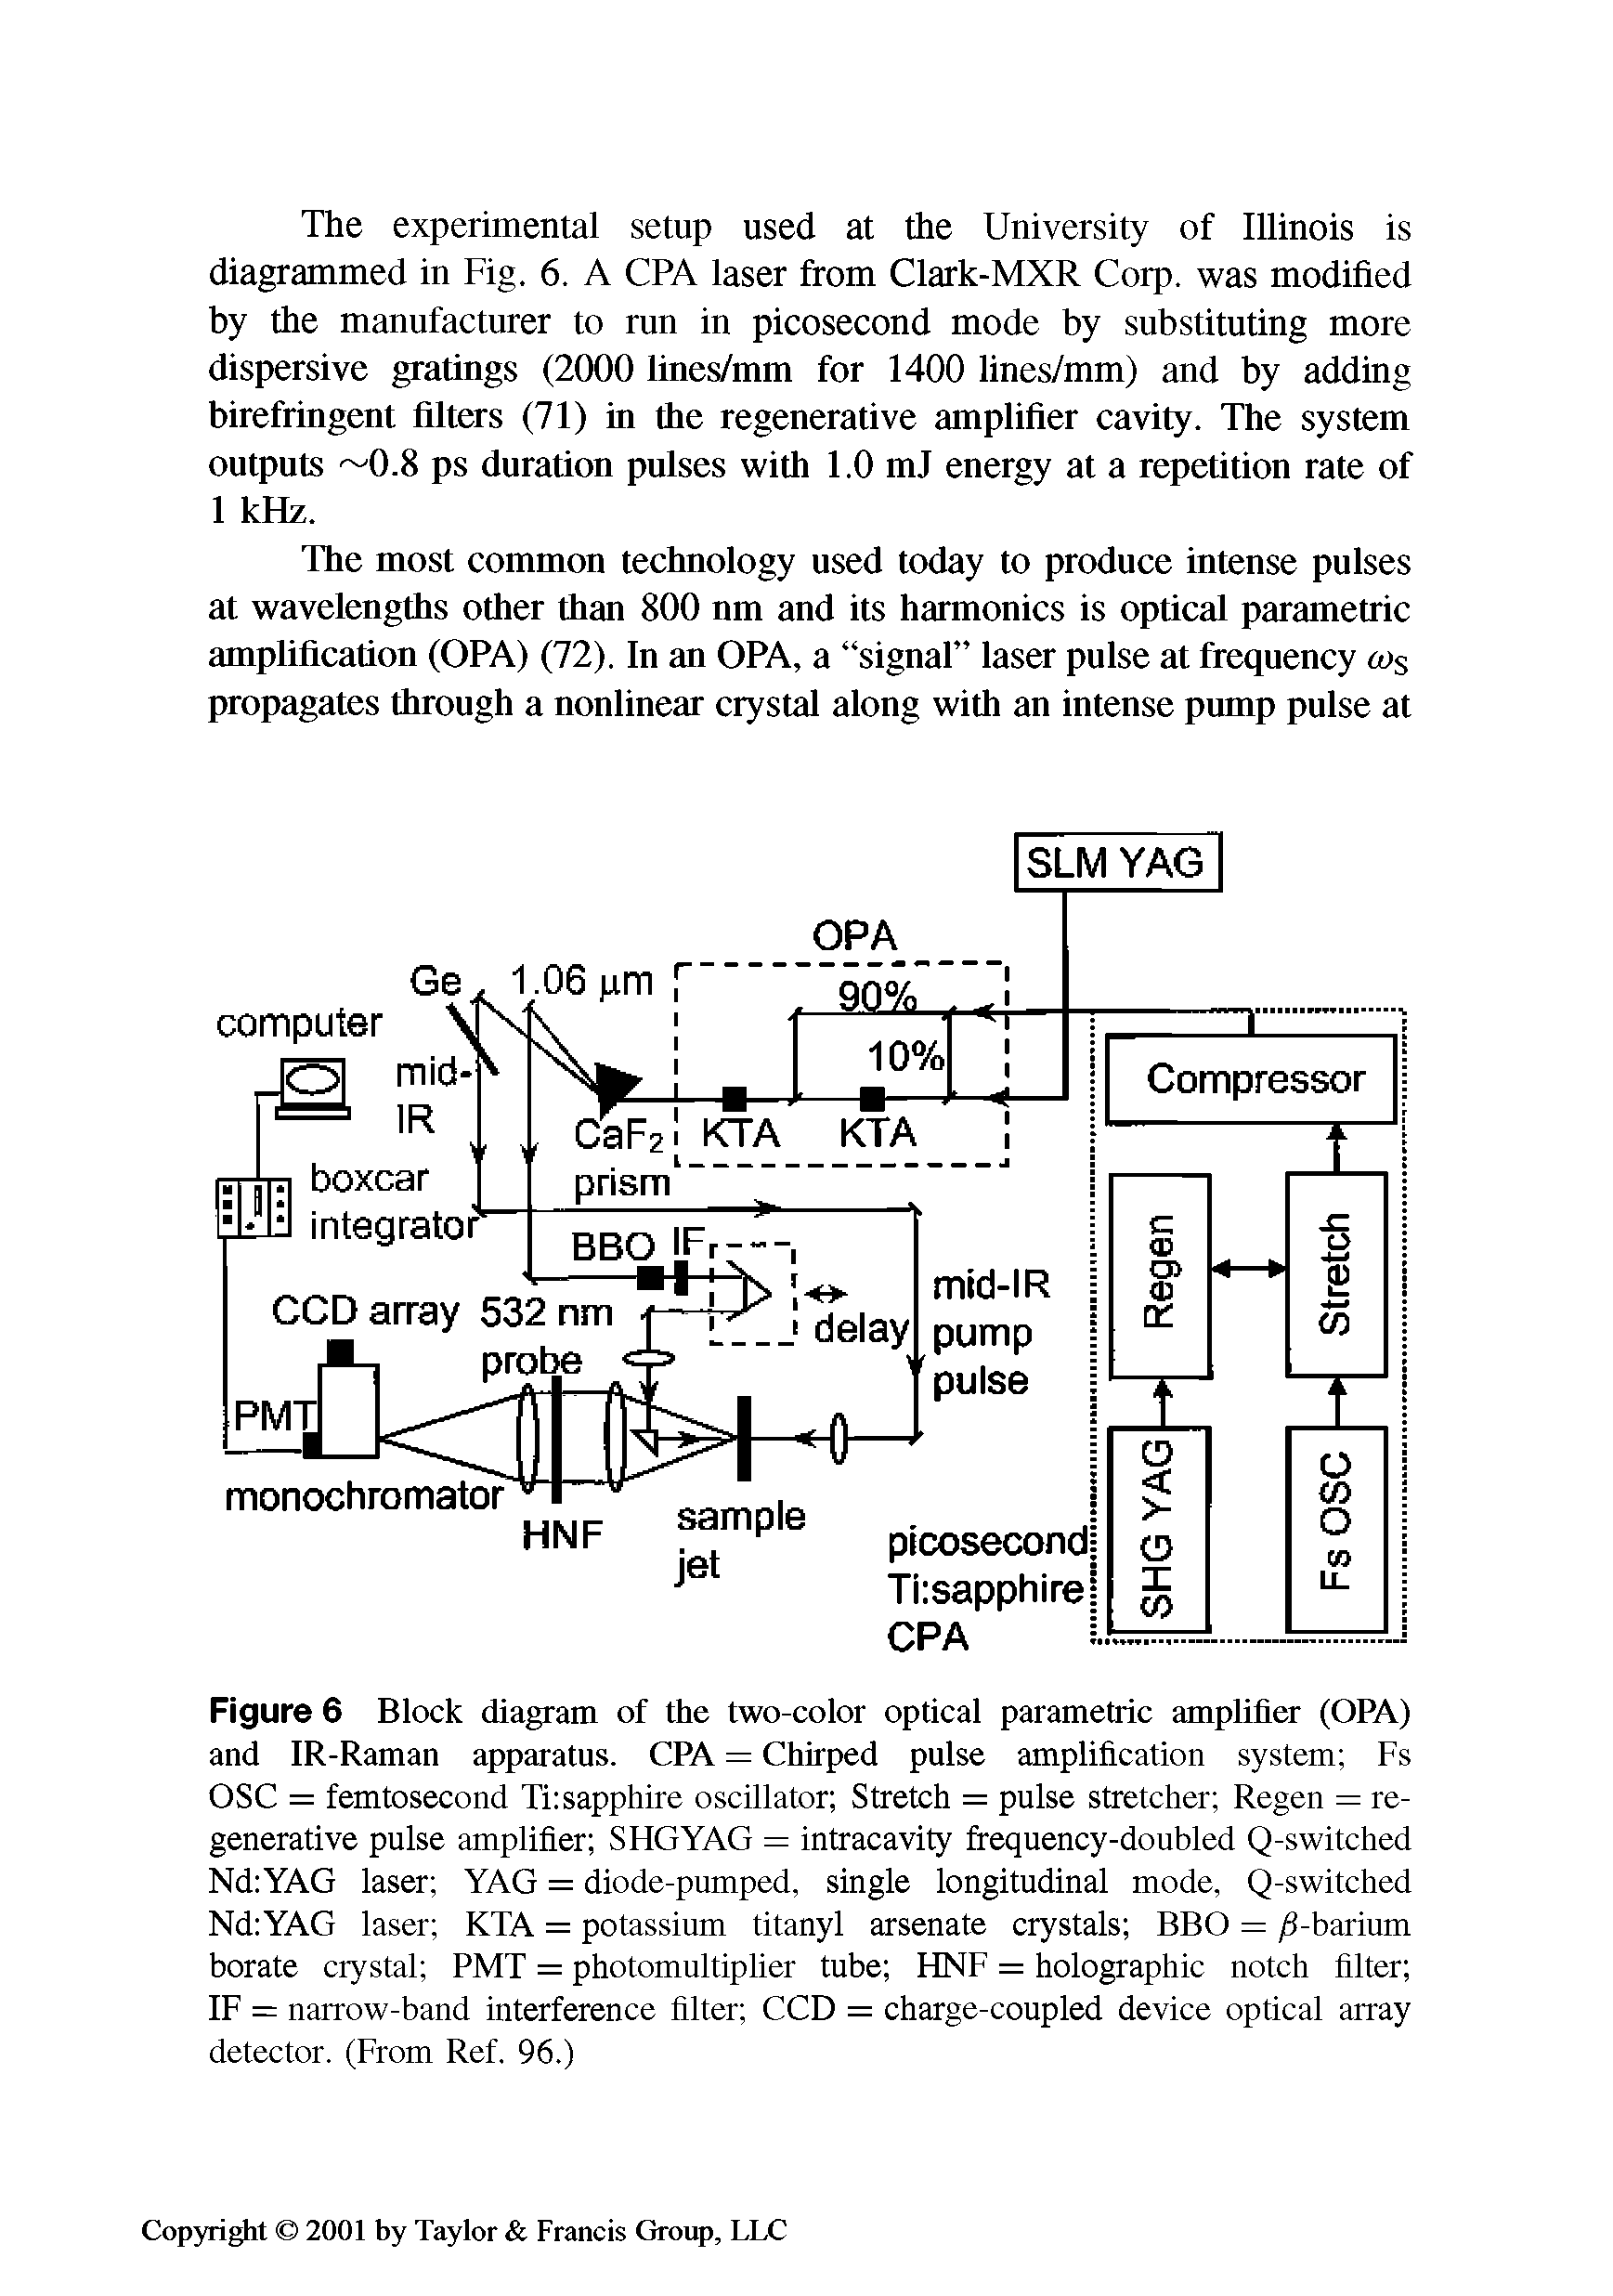 Figure 6 Block diagram of the two-color optical parametric amplifier (OPA) and IR-Raman apparatus. CPA = Chirped pulse amplification system Fs OSC = femtosecond Ti sapphire oscillator Stretch = pulse stretcher Regen = regenerative pulse amplifier SHGYAG = intracavity frequency-doubled Q-switched Nd YAG laser YAG = diode-pumped, single longitudinal mode, Q-switched Nd YAG laser KTA = potassium titanyl arsenate crystals BBO = /J-barium borate crystal PMT = photomultiplier tube HNF = holographic notch filter IF = narrow-band interference filter CCD = charge-coupled device optical array detector. (From Ref. 96.)...